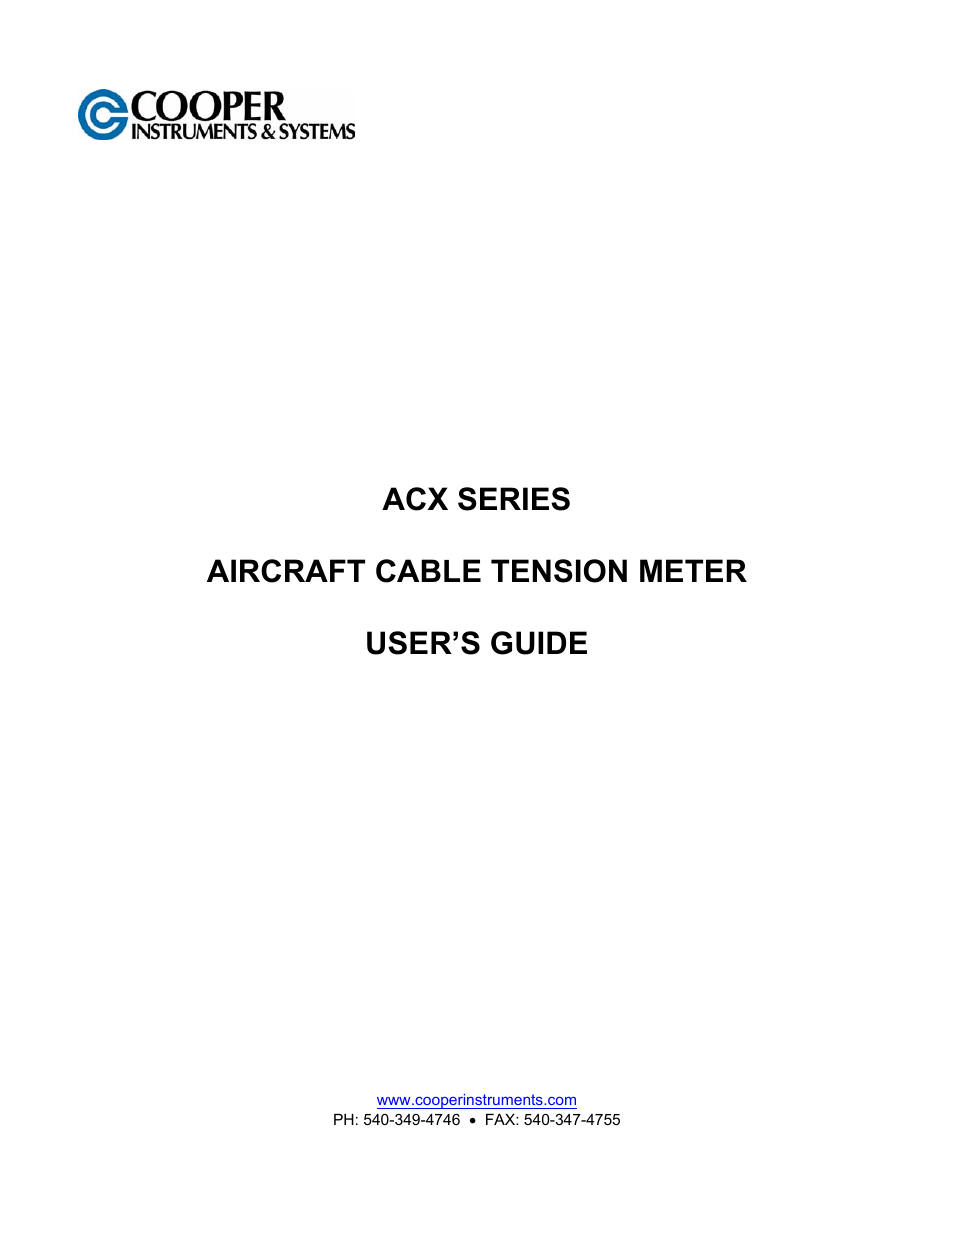 ACX-1 Aircraft Cable Tension Meter